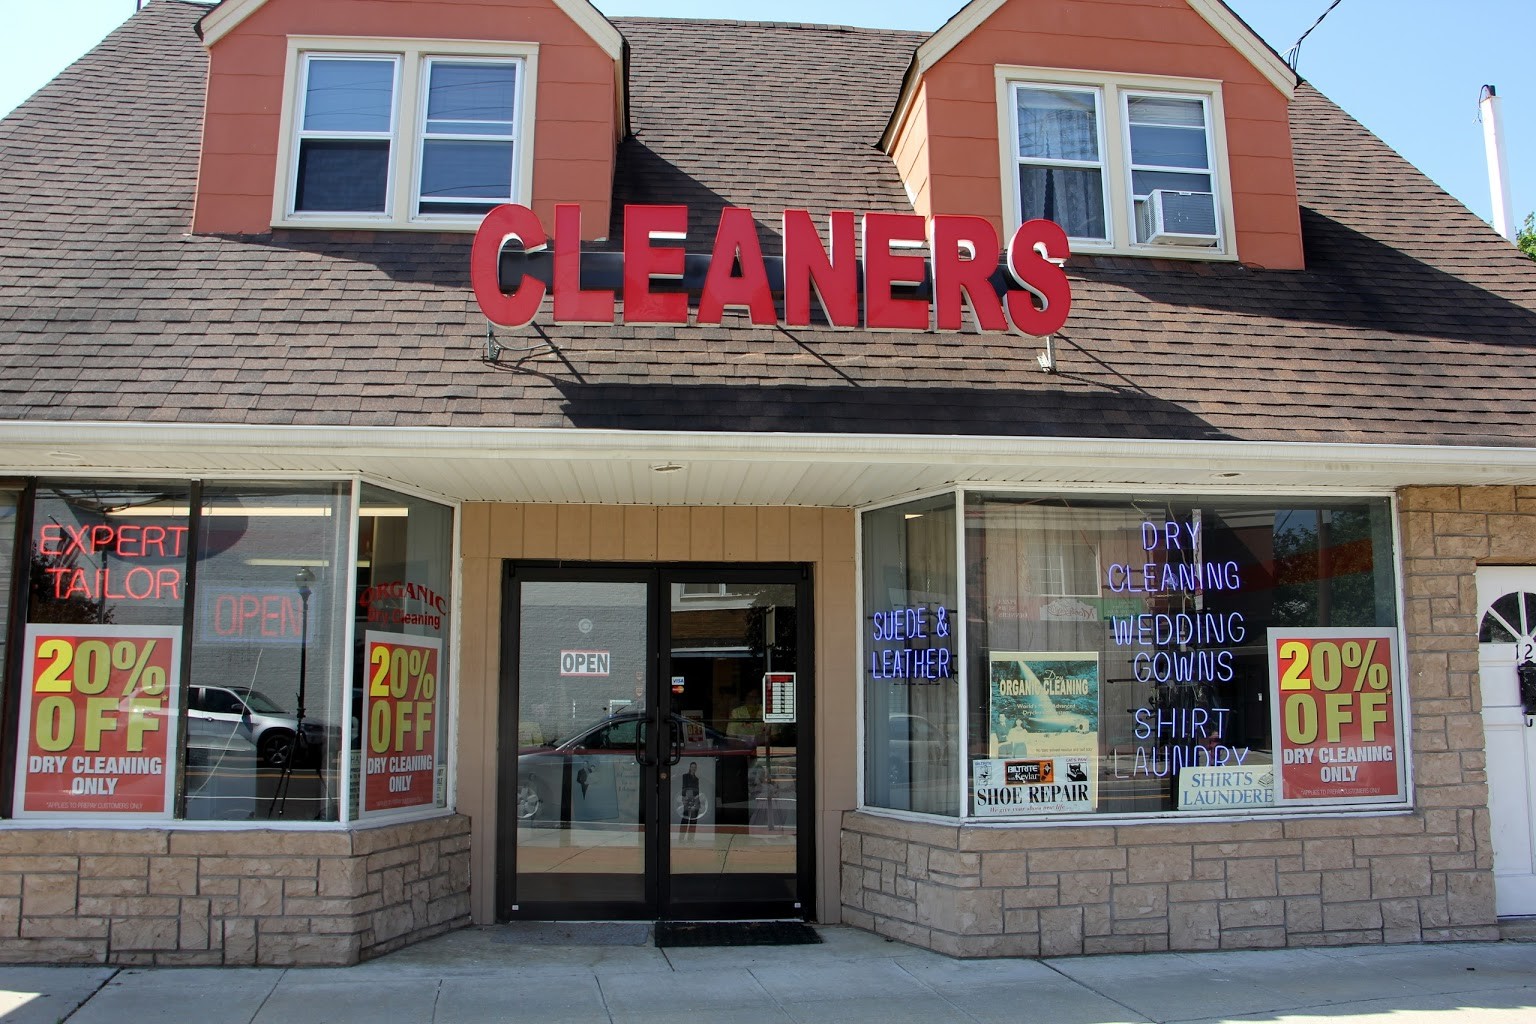 Patti Cleaners a Dry Cleaner in Maple Shade, NJ